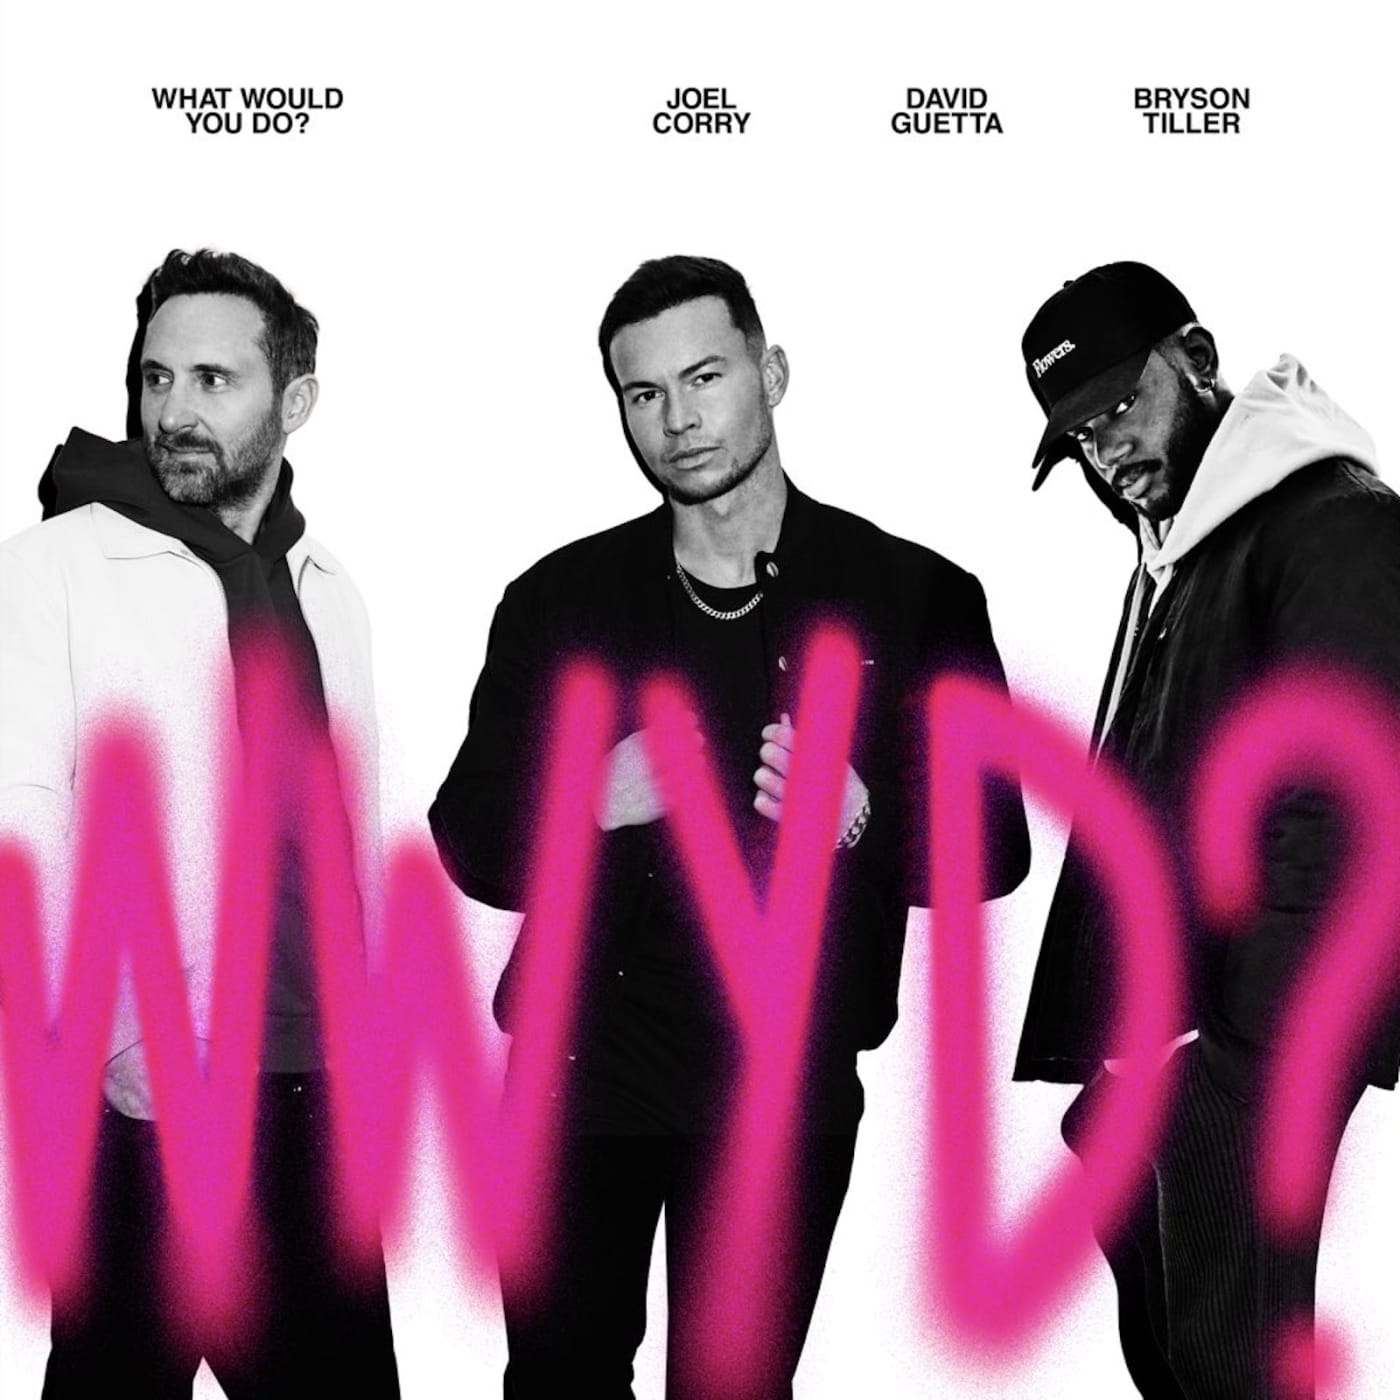 Bryson Tiller, Joel Corry and David Guetta "What Would You Do?"